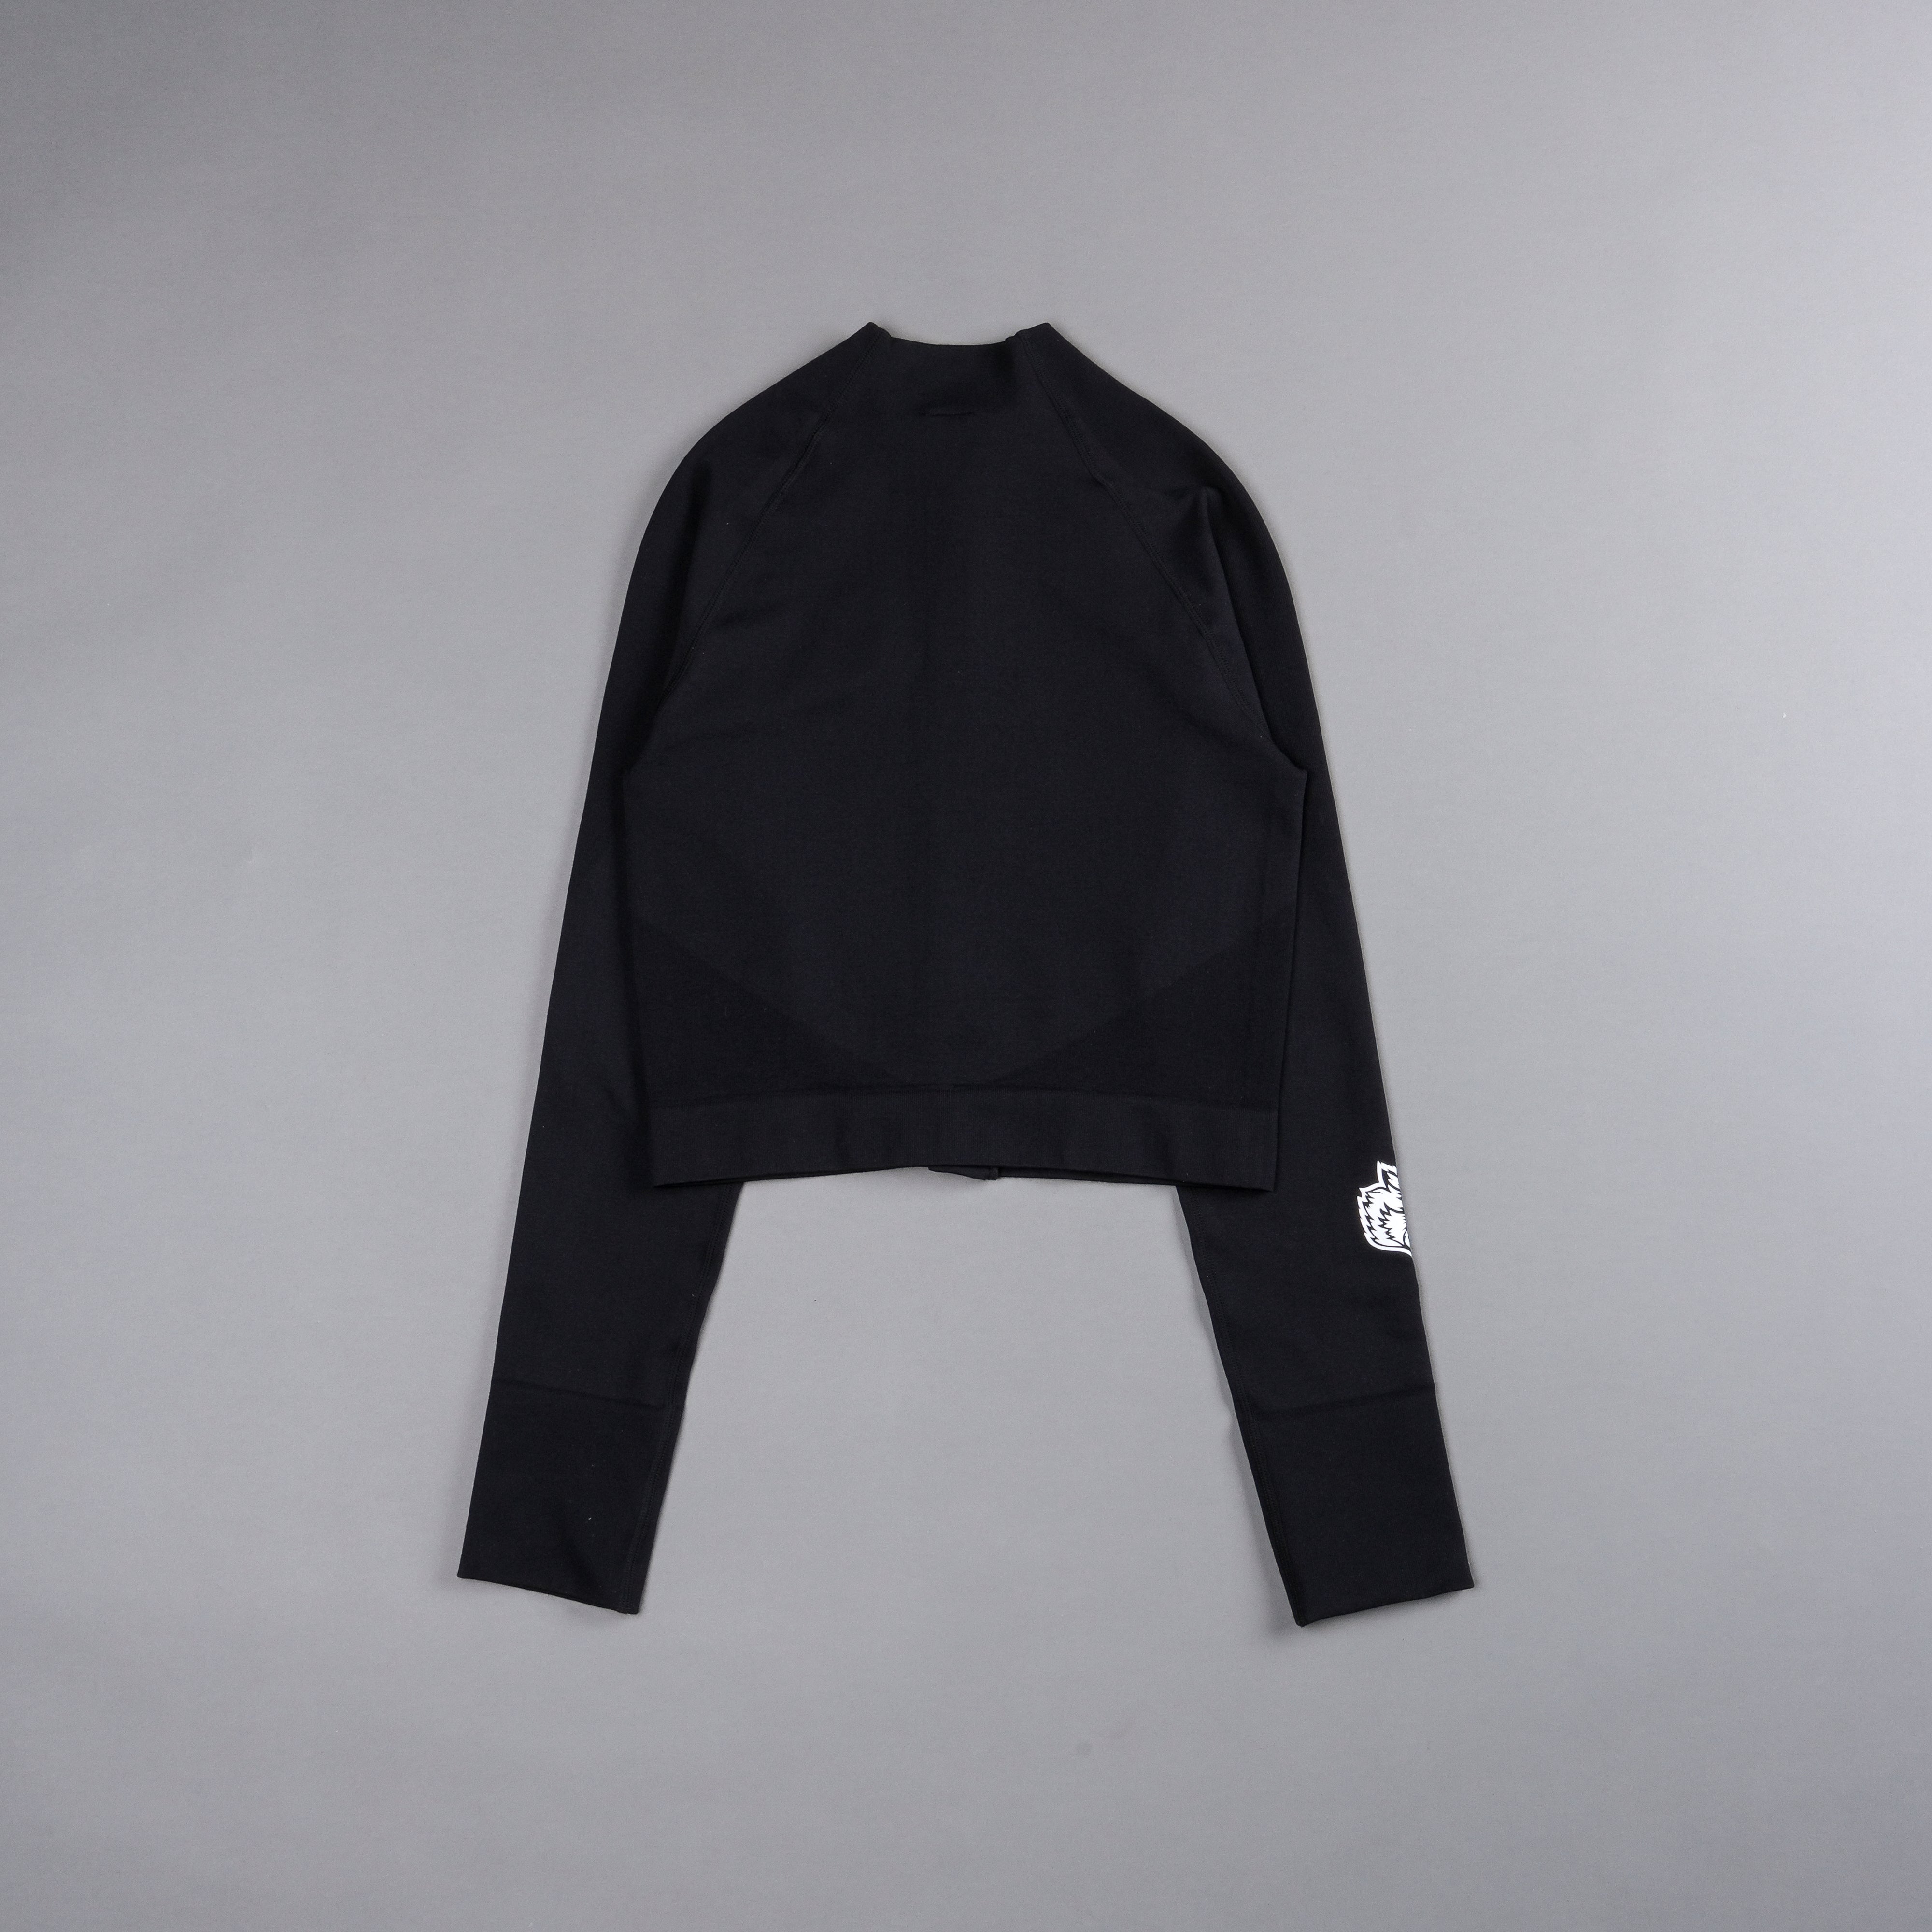 Our League "Everson Seamless" Yasmin L/S Zip Top in Black